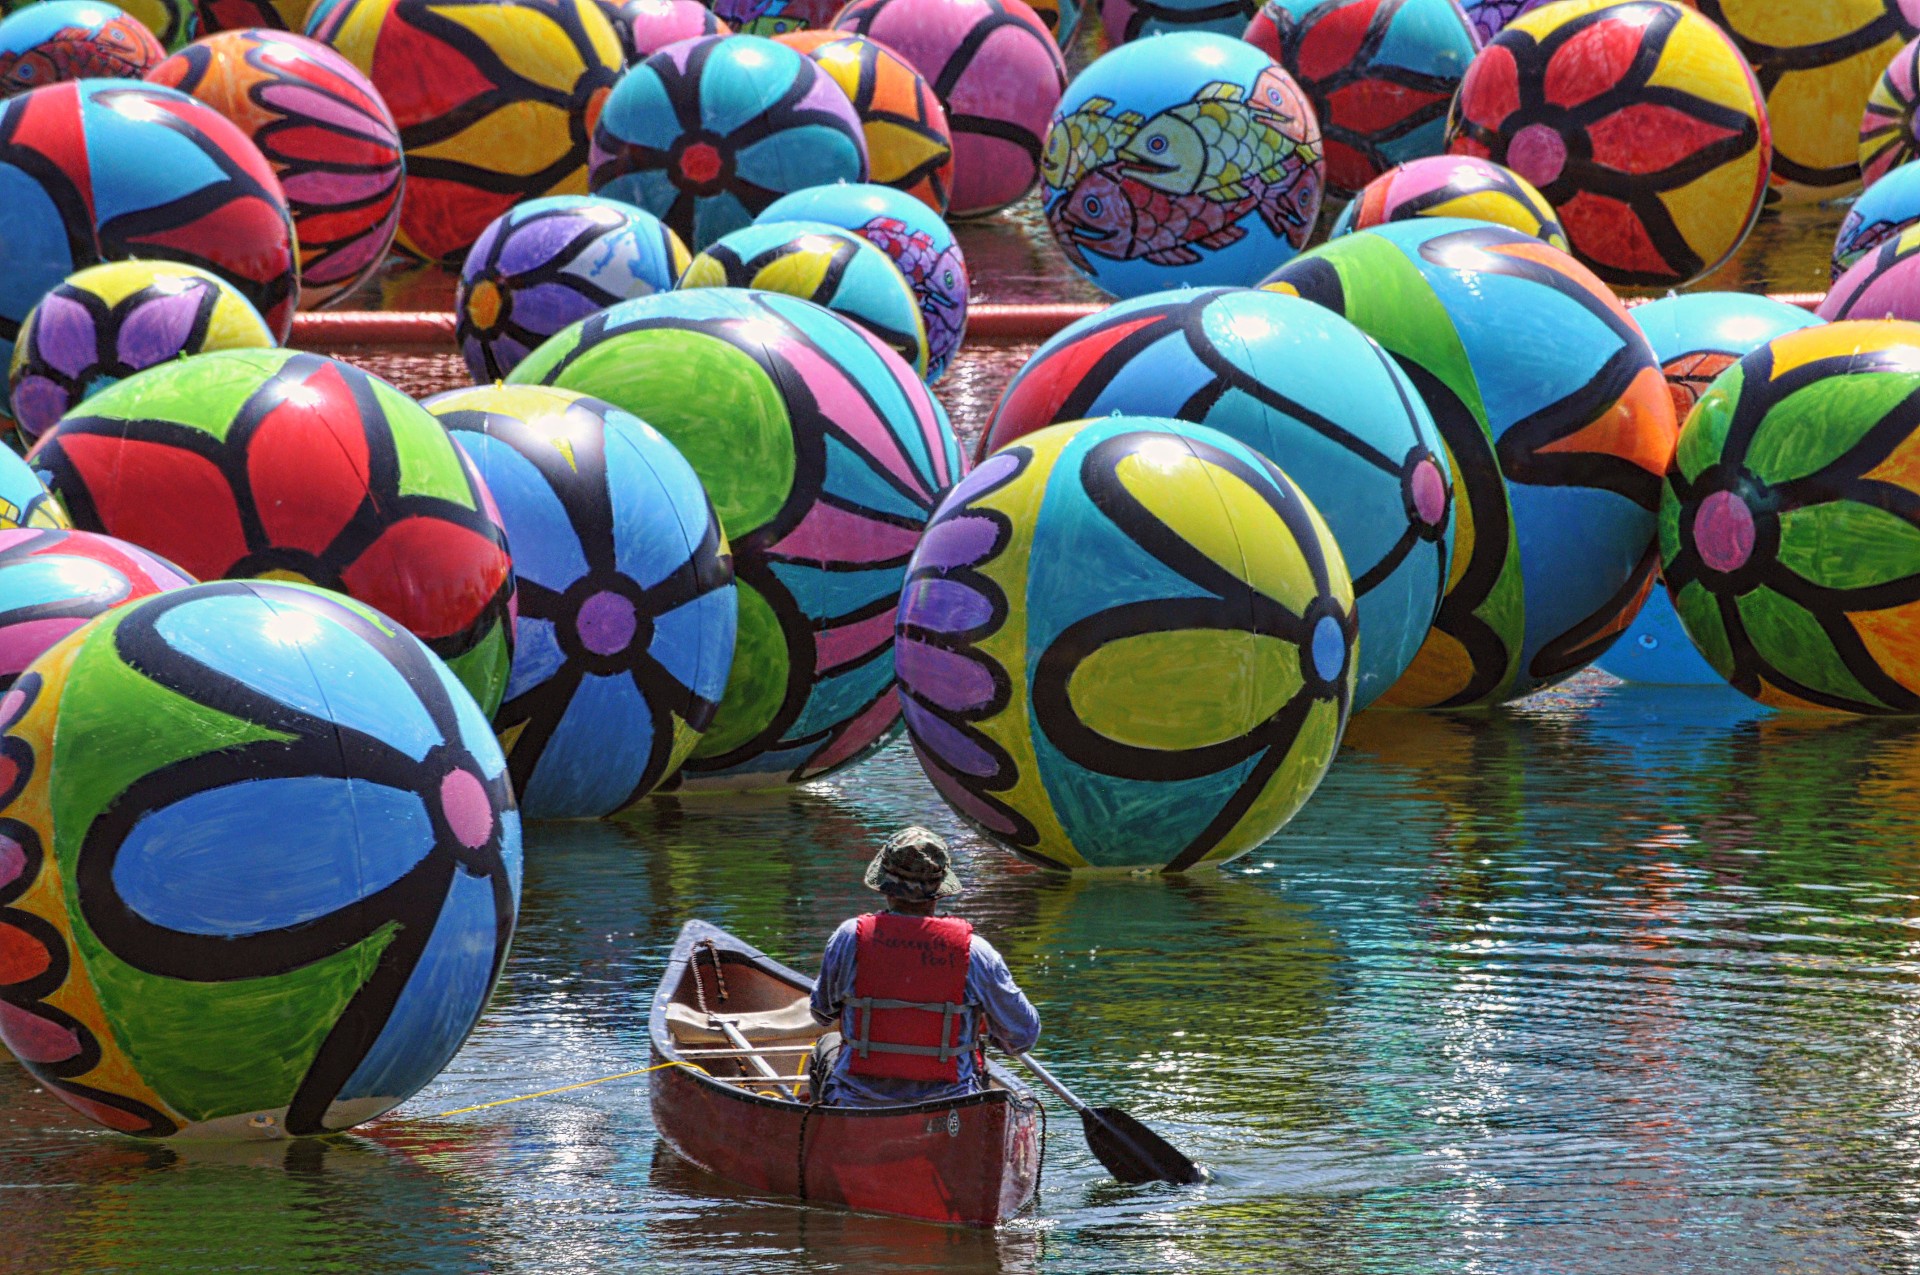 Giant Hand-Painted Balloons